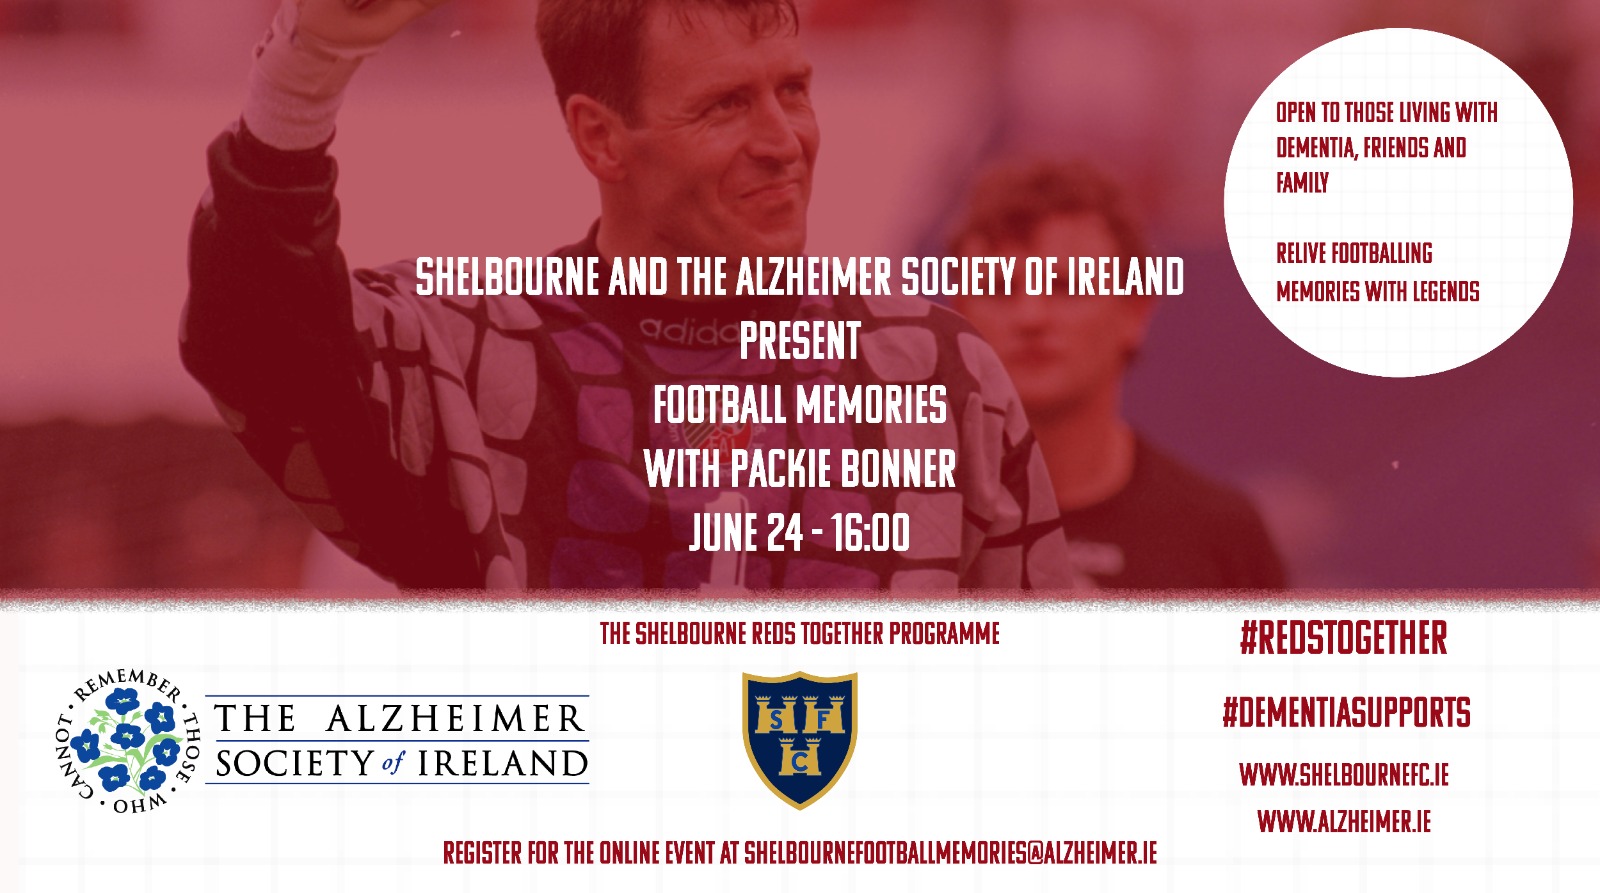 Shels team up with The Alzheimer Society of Ireland for Football Memories events